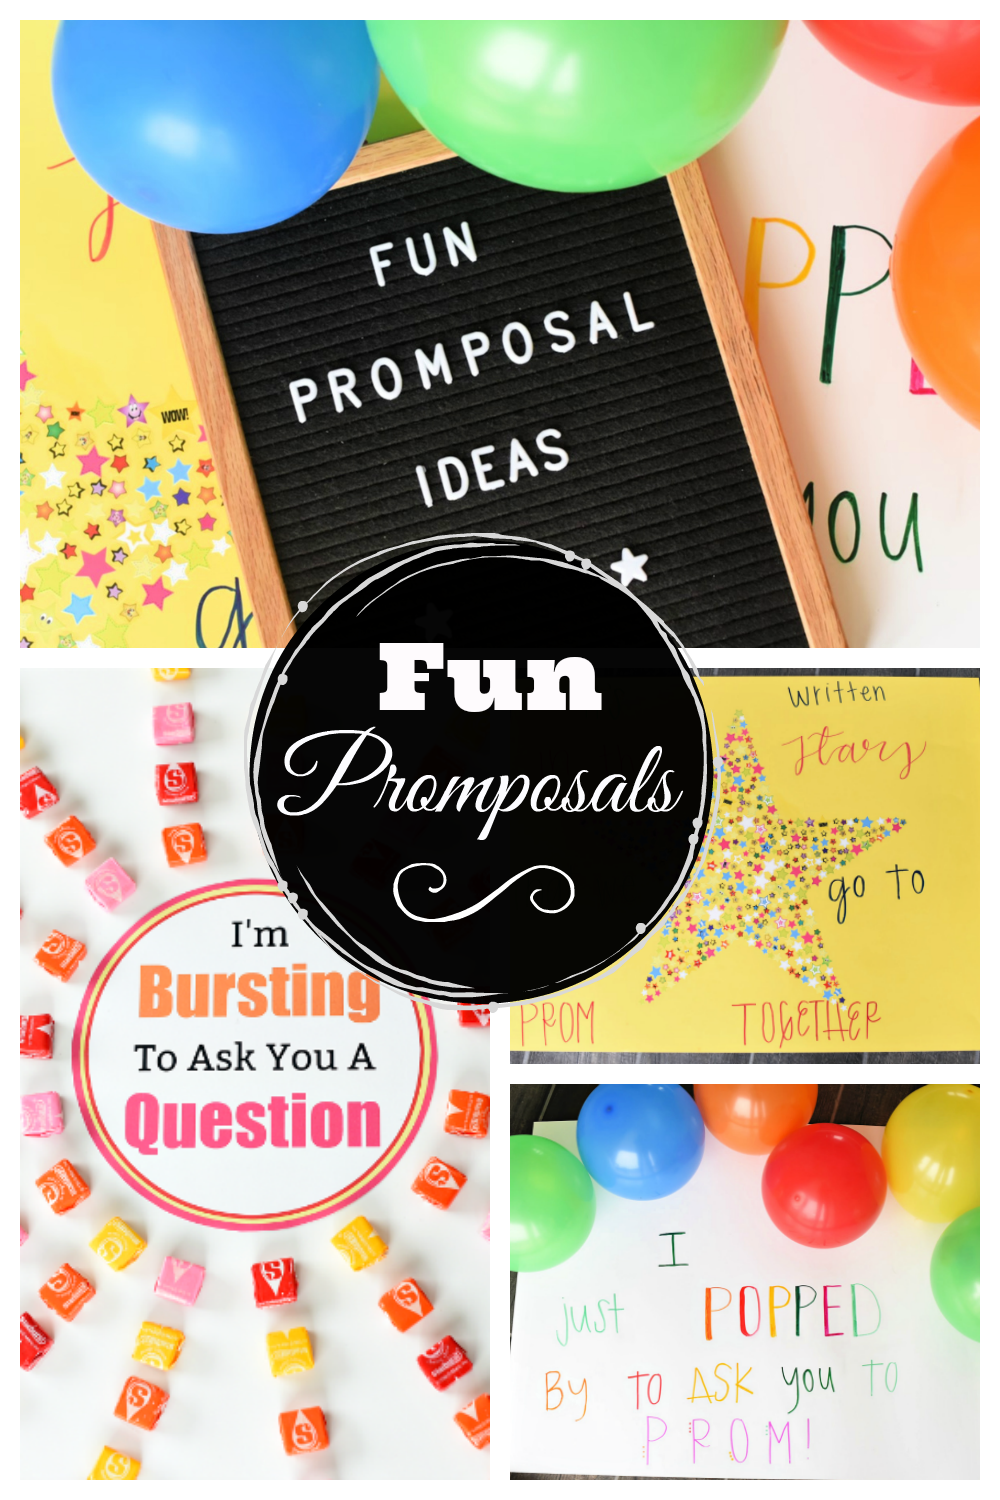 Fun and simple promposals. Invited to a high school dance? We have you covered with tons of fun and simple promposals. We love how simple these prom proposal ideas are, and they are perfect for your next dance. #promposals #promposalideas #Funpromposals #funpromposalideas